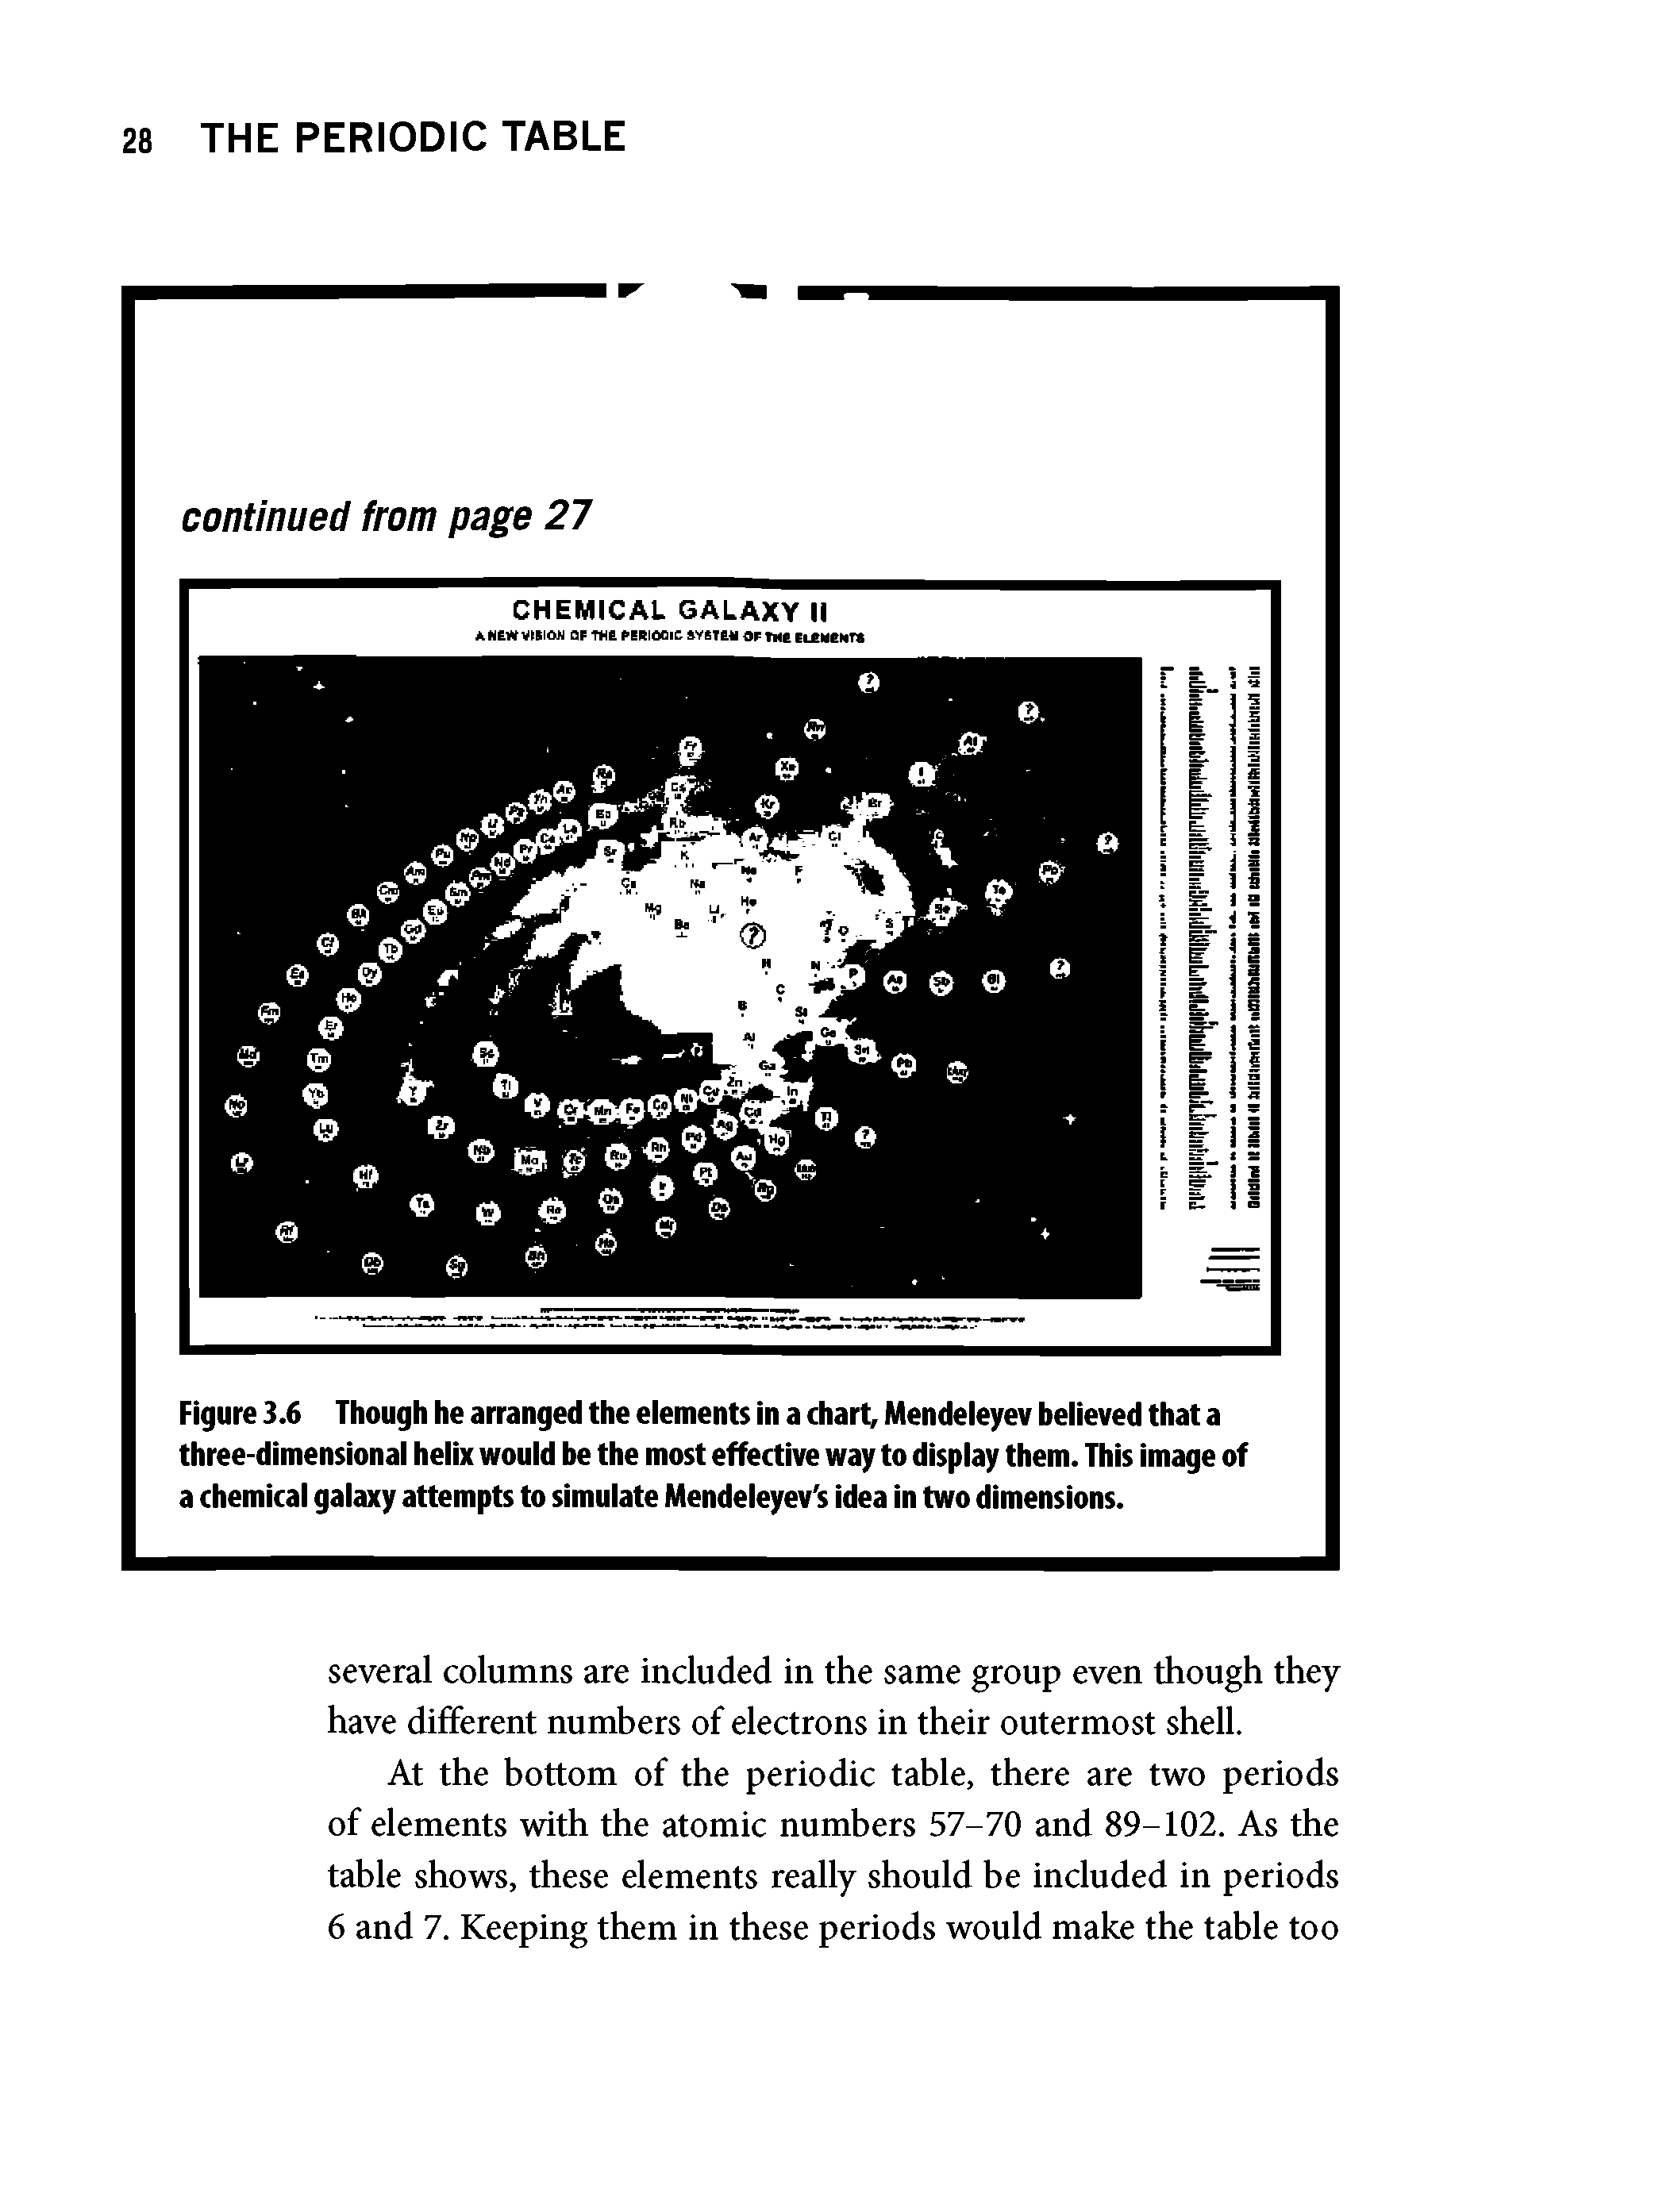 Figure 3.6 Though he arranged the elements in a chart, Mendeleyev believed that a three-dimensional helix would be the most effective way to display them. This image of a chemical galaxy attempts to simulate Mendeleyev s idea in two dimensions.